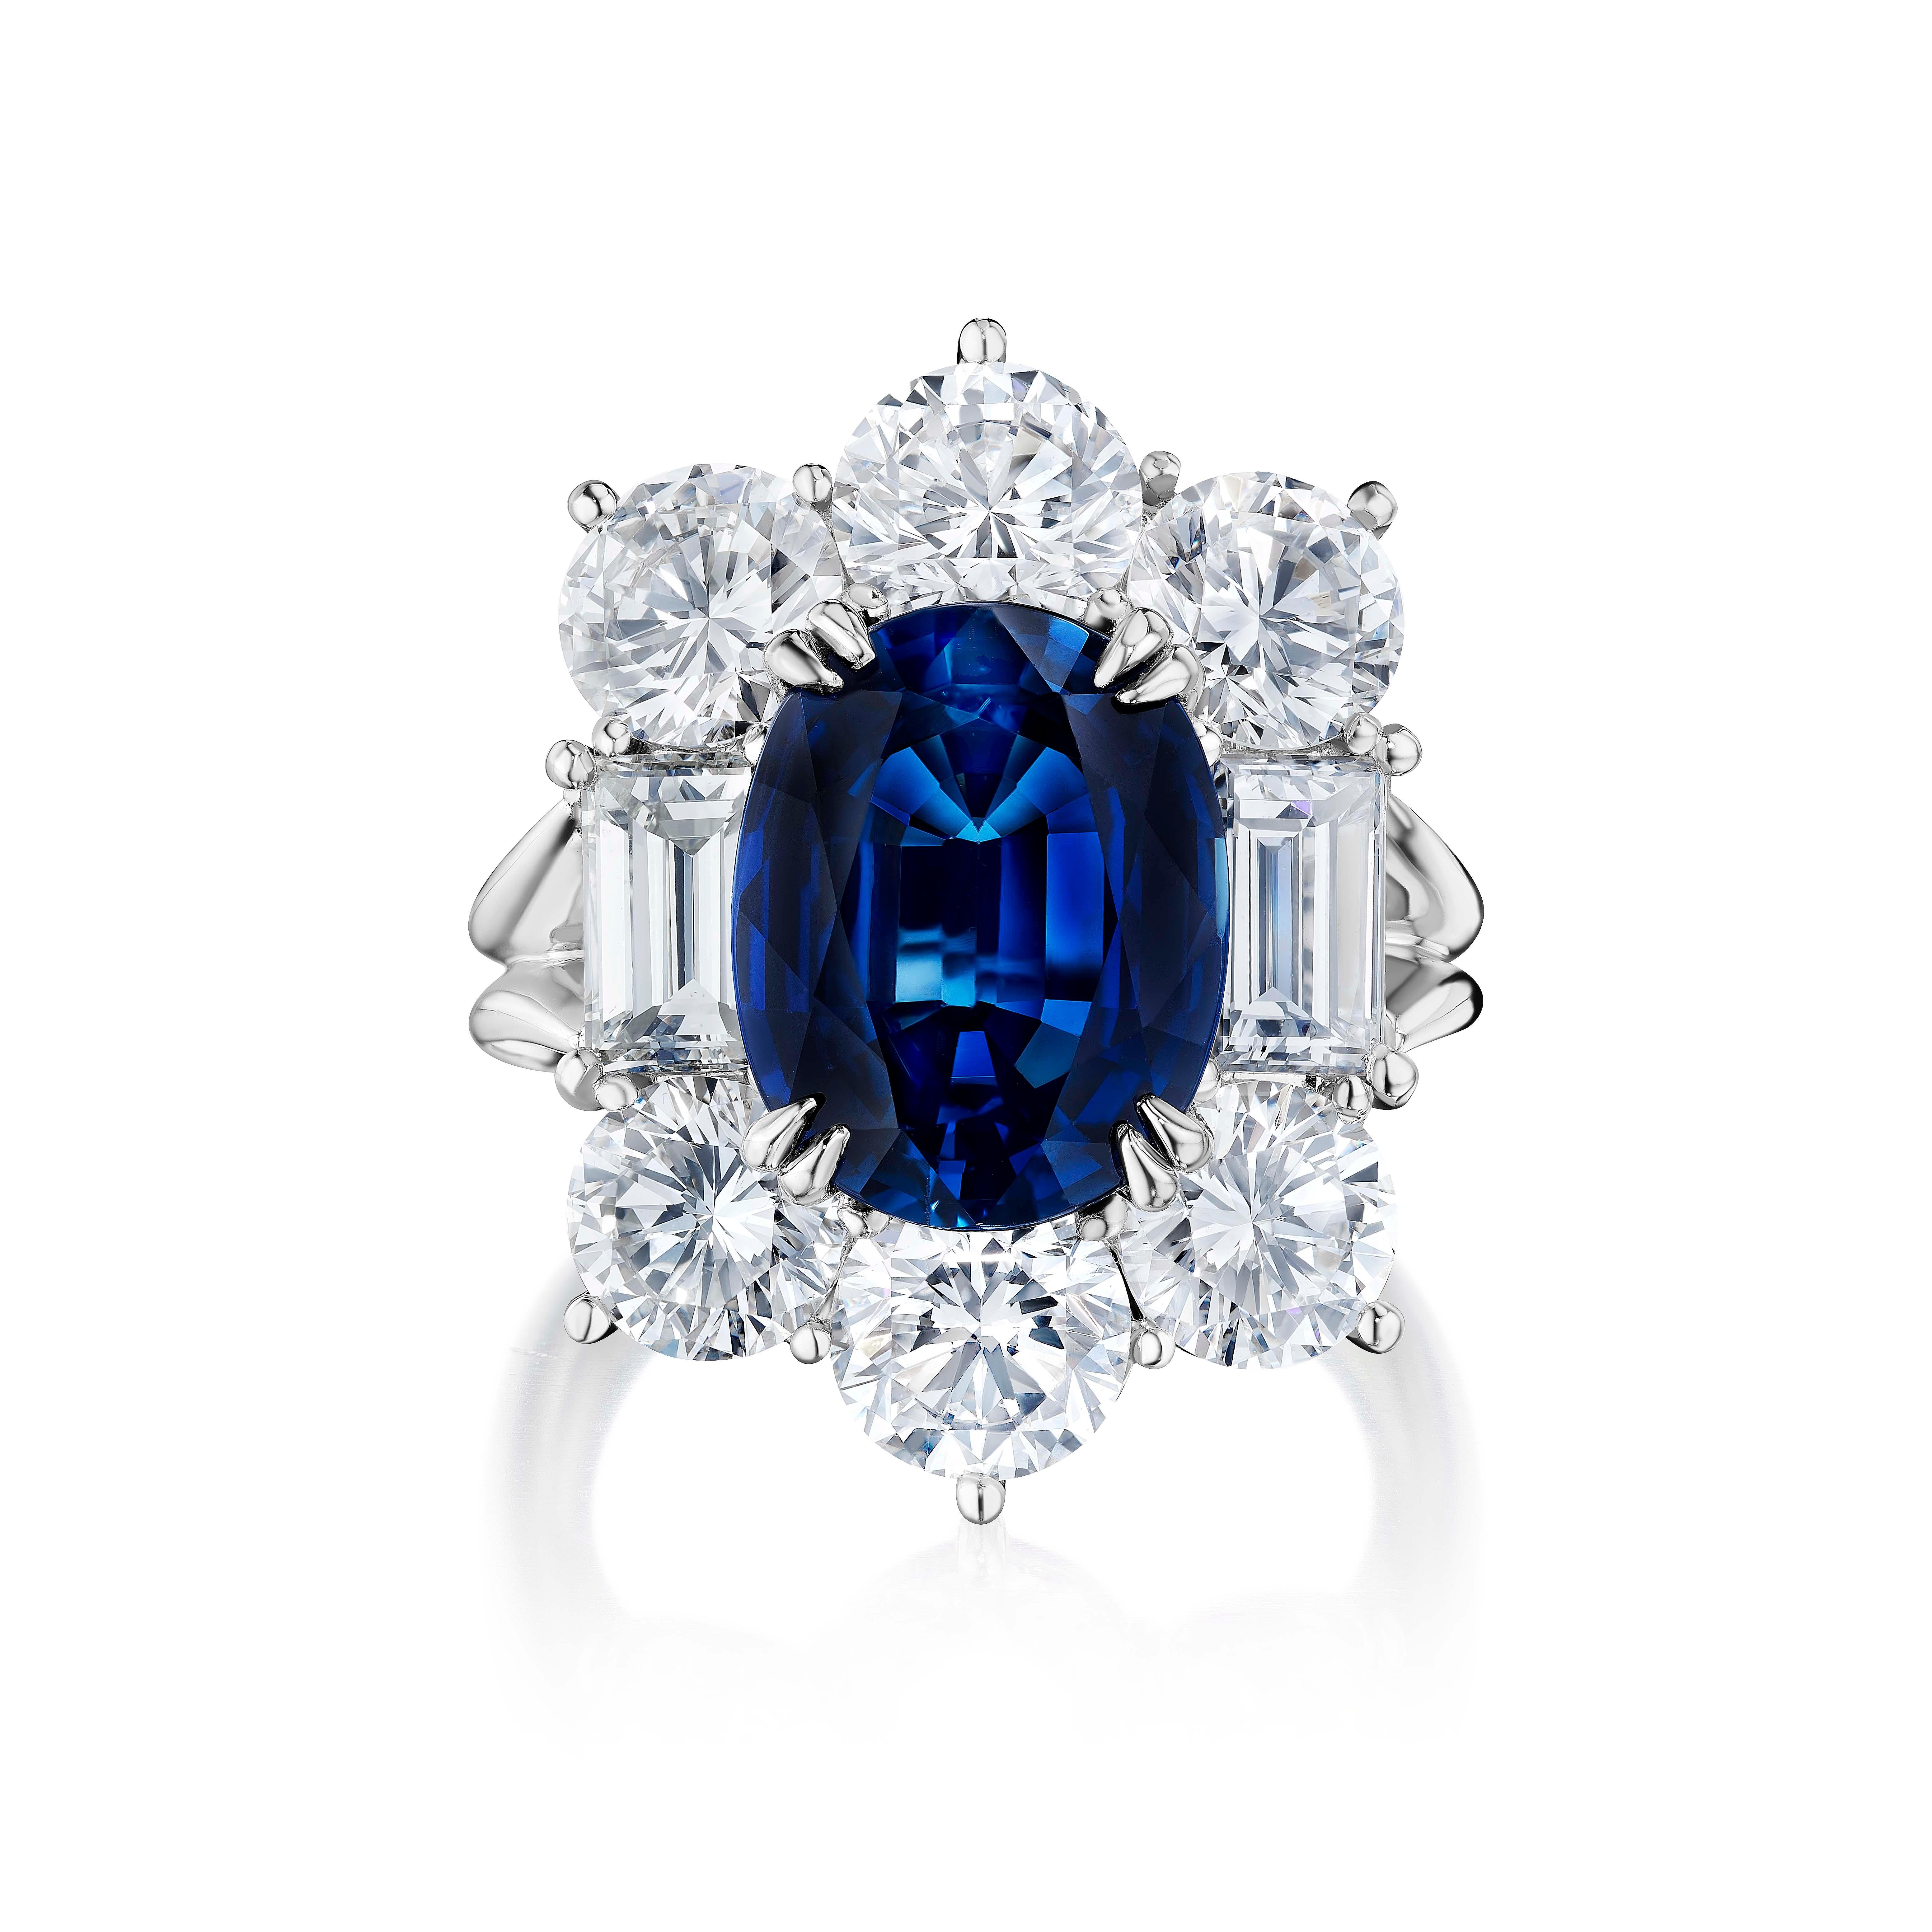 Centered upon a 6.30 Carat unheated Sapphire of Thai origin. Accompanied with AGL certificate.
Surrounded by Round and Emerald Cut Diamonds weighing 6.65 Carats.
Set in Platinum.
Finger size 6.5